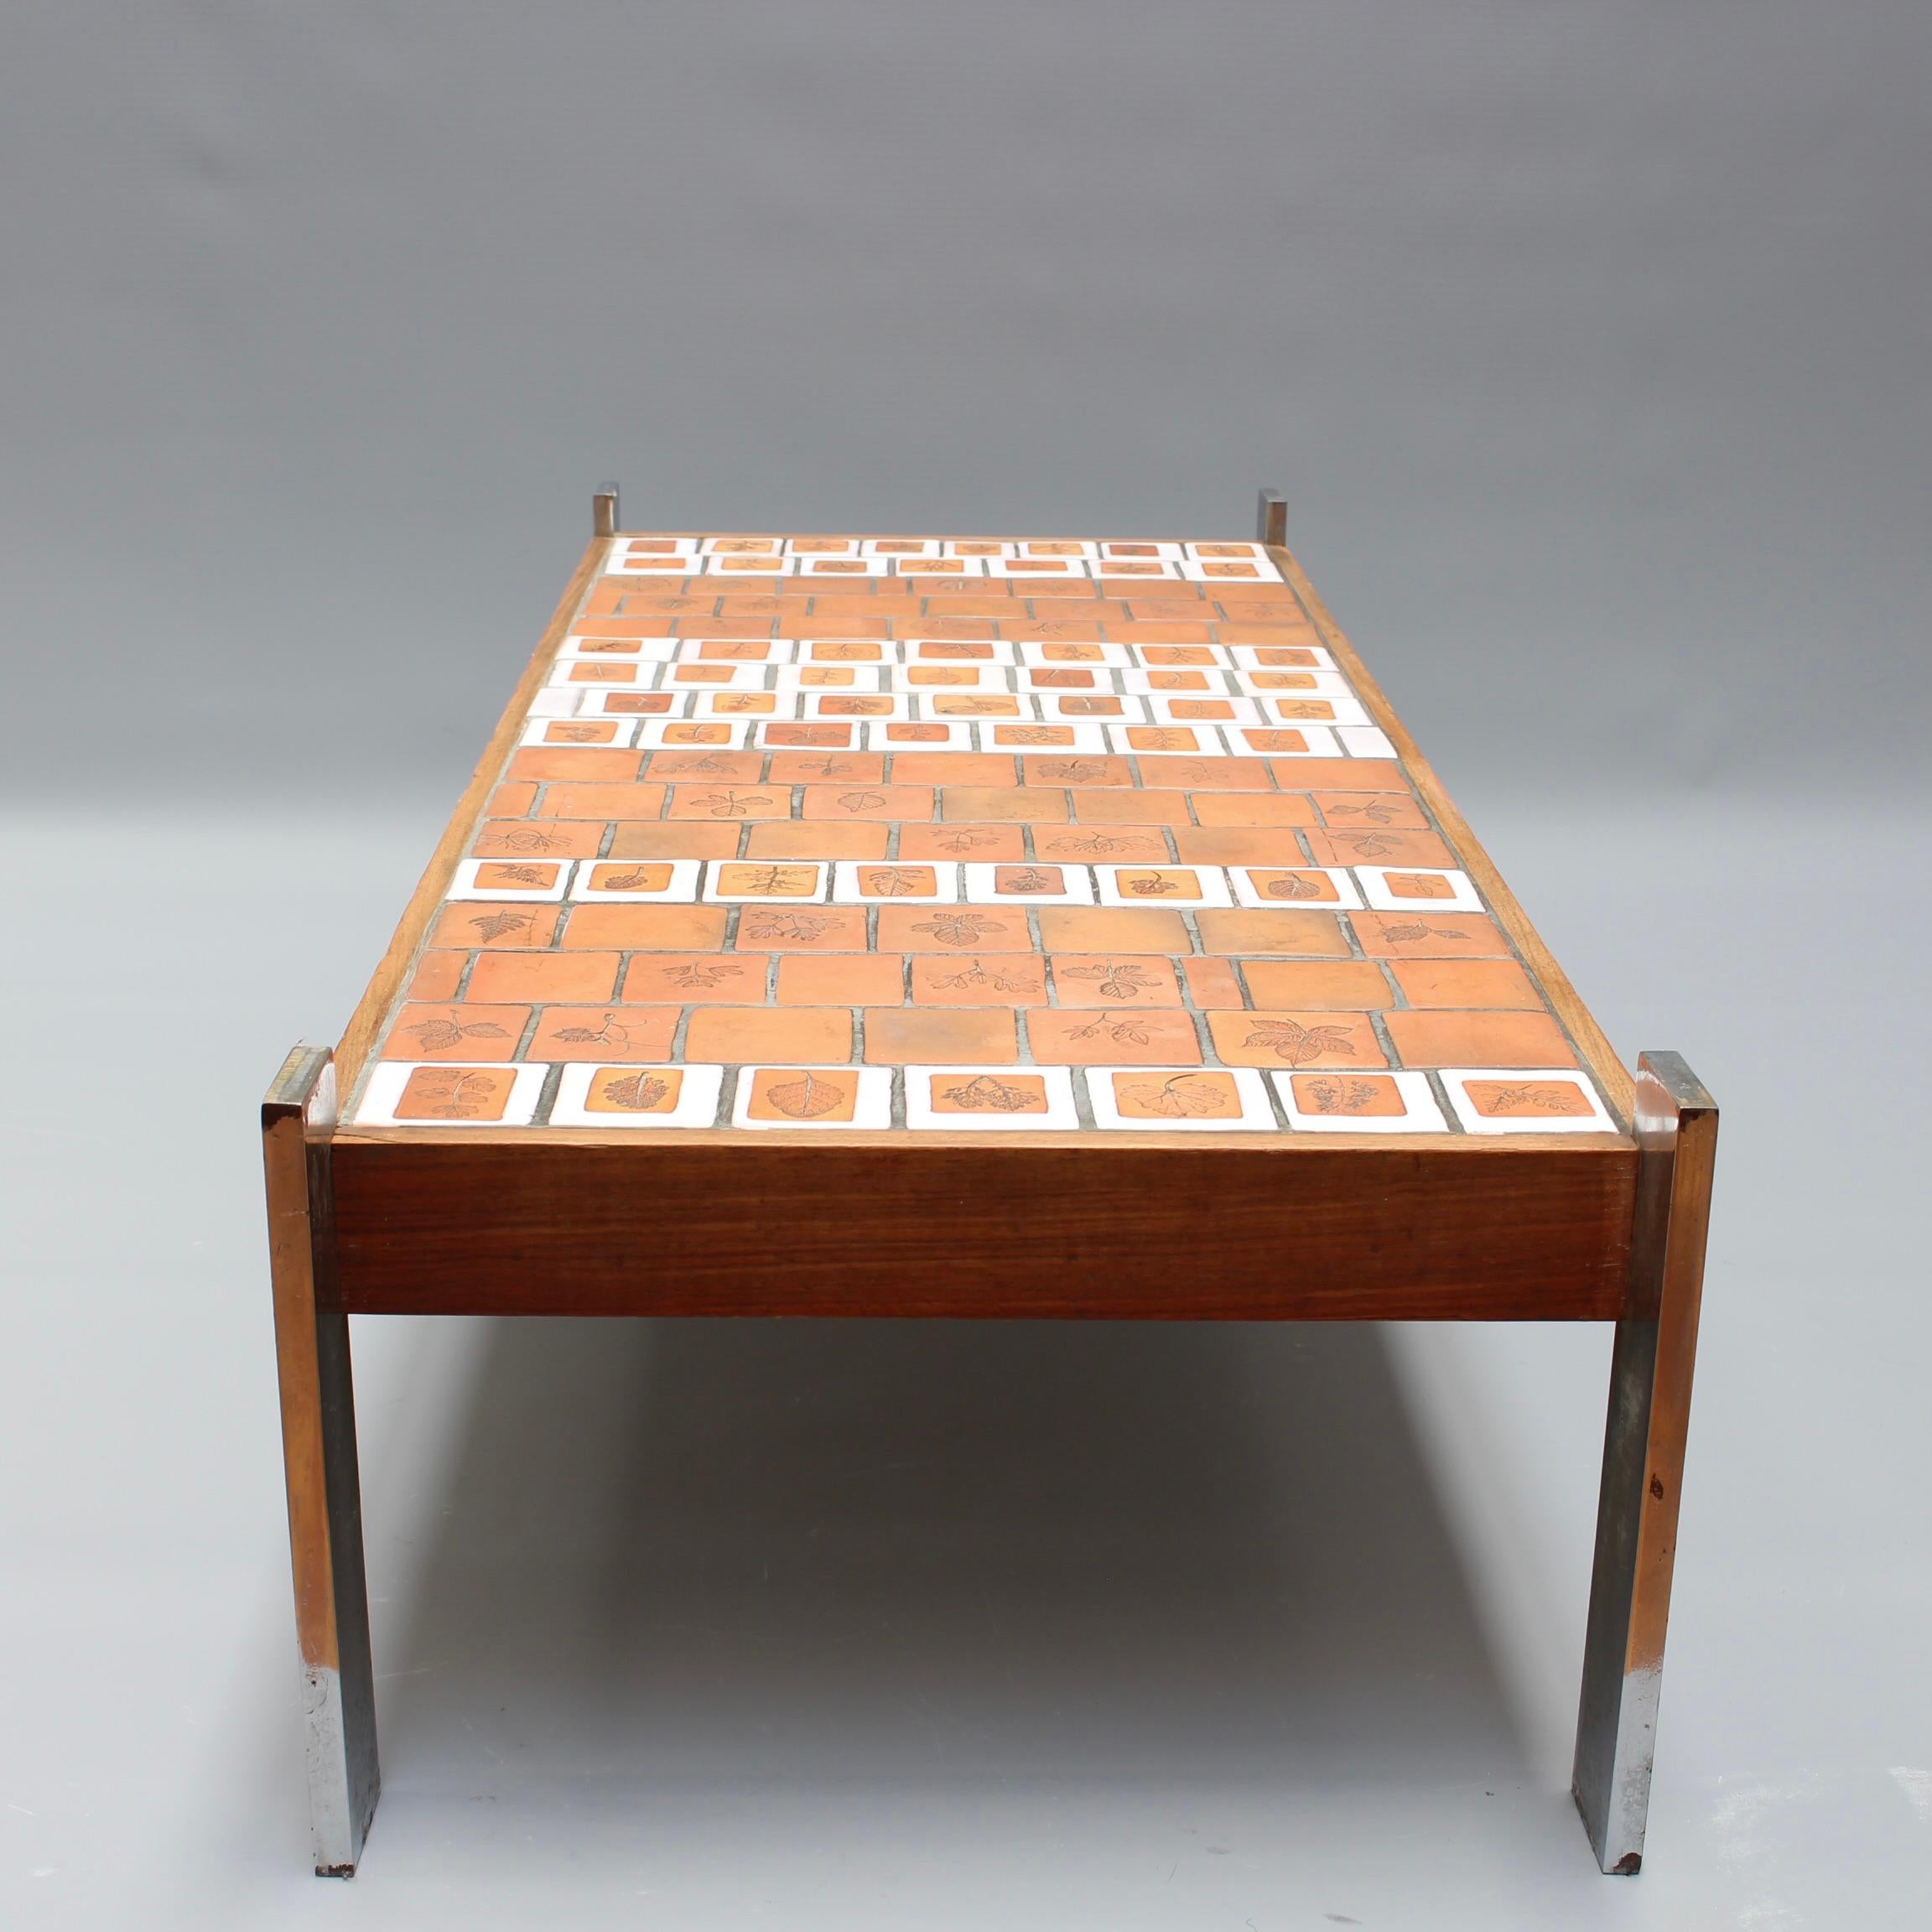 Vintage French Coffee Table with Leaf Motif Tiles by Roger Capron (circa 1970s) For Sale 6